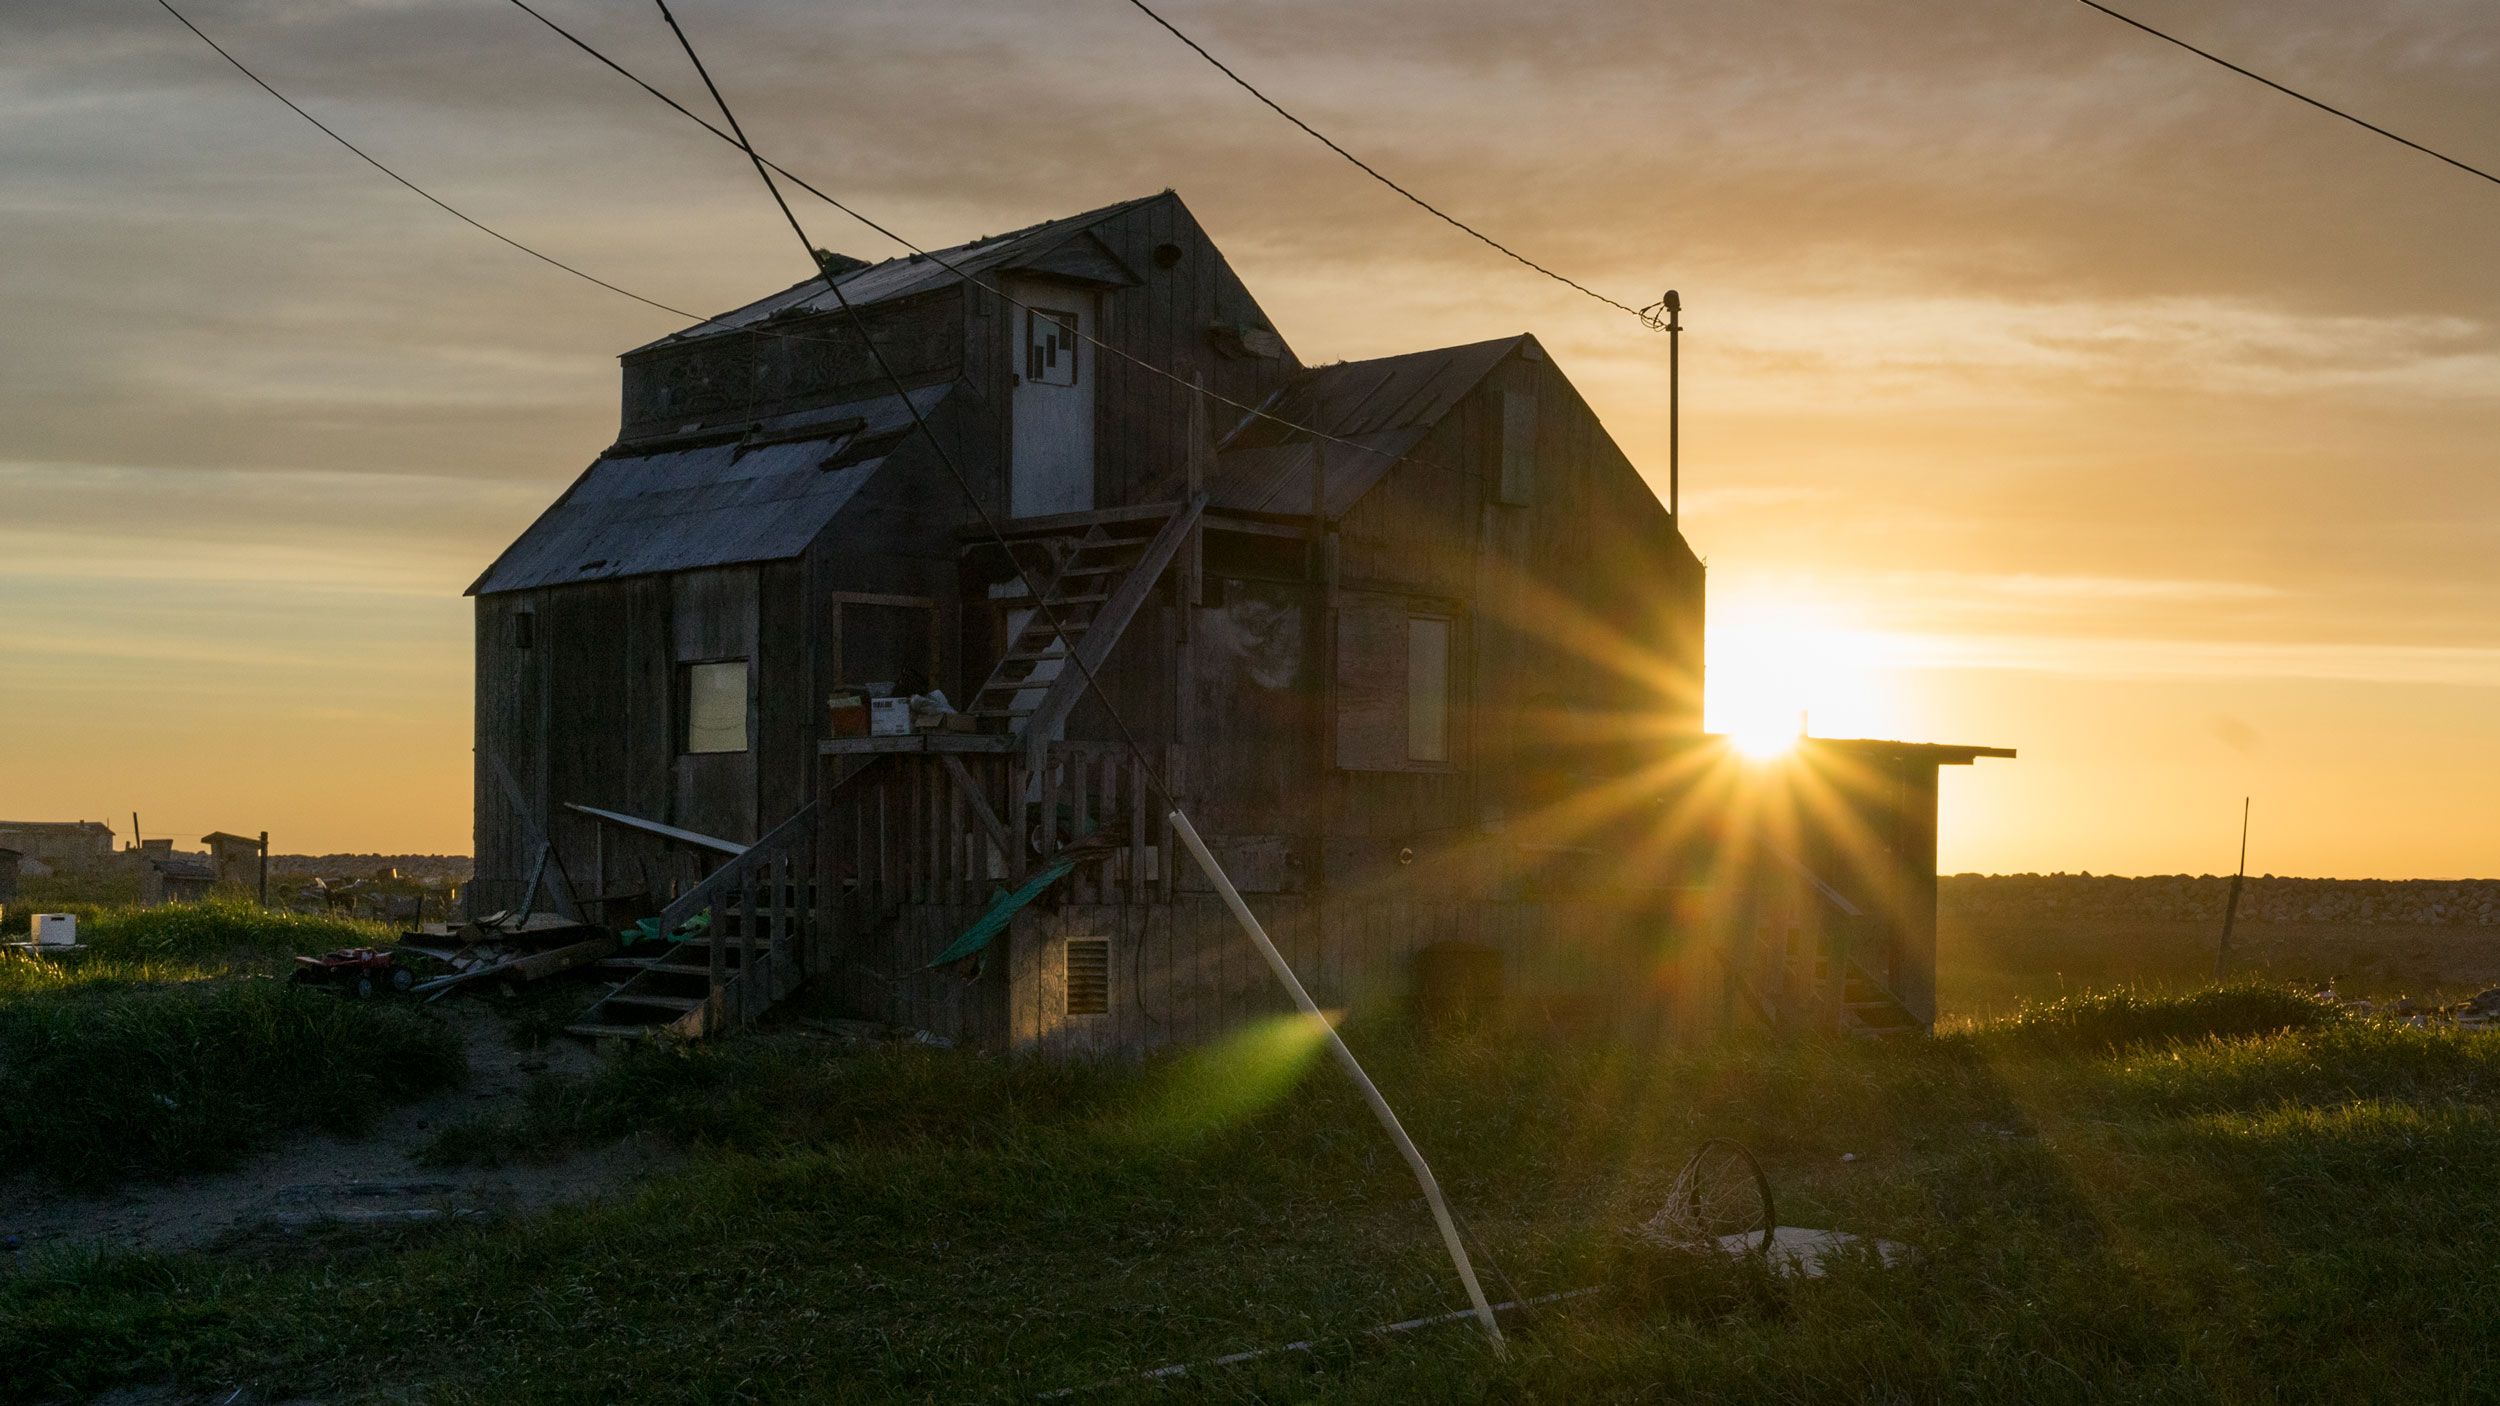 Rays of sunlight spill over a  Shishmaref home as the midnight sun sets over the Chuckchi Sea. Image courtesy of Nick Mott. United States, 2018.